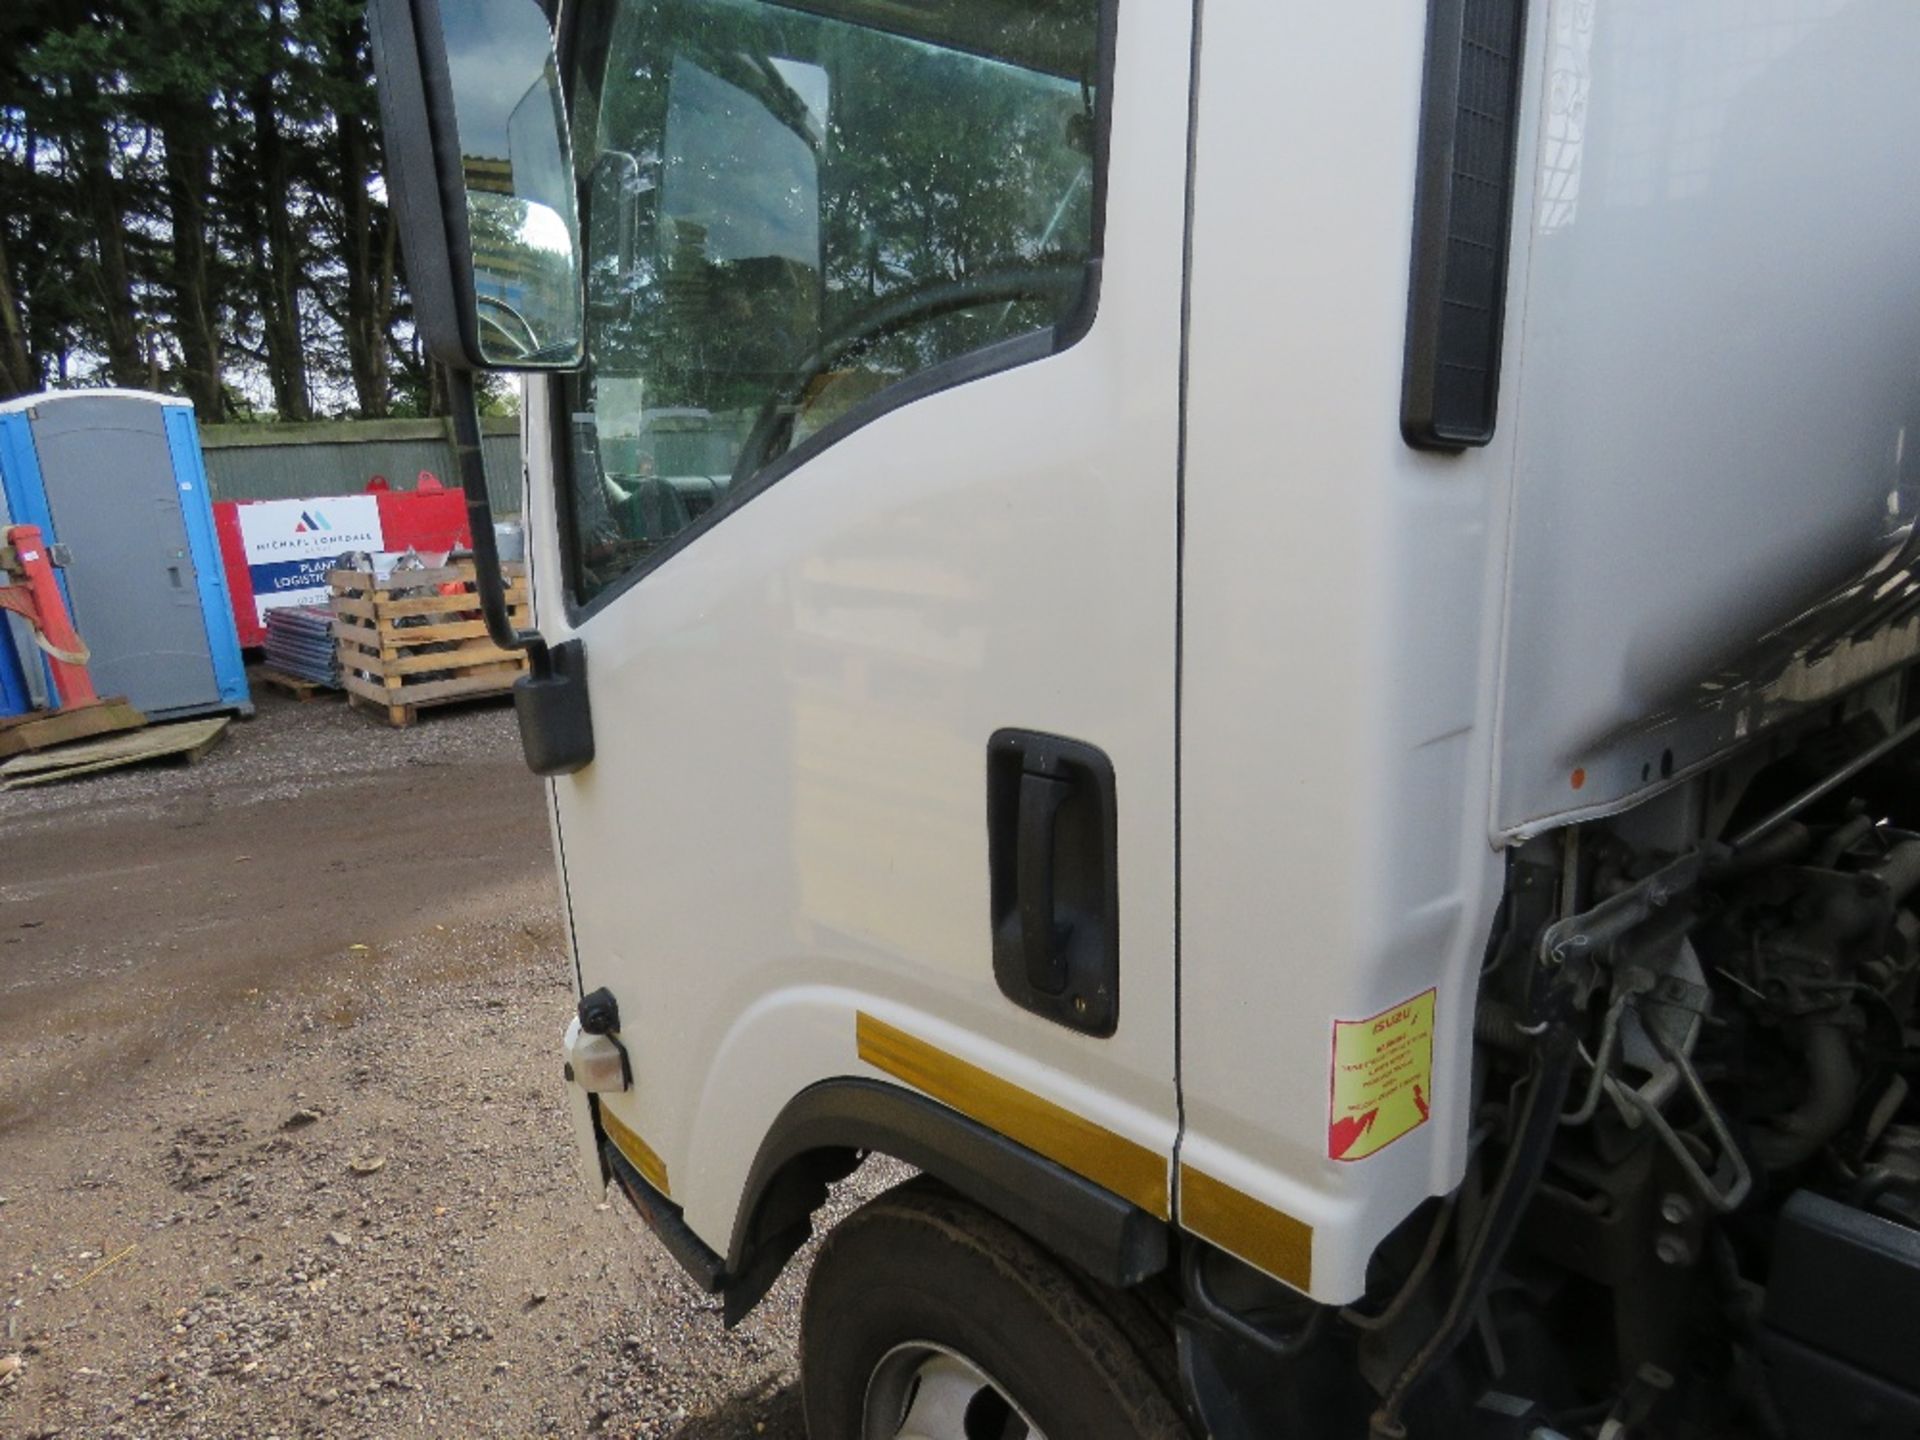 ISUZU N2R N75-150 7.5 TONNE SKIP LORRY REG: AO65 EVK. FIRST REGISTERED 12/11/2015 WITH V5. (CHECKED - Image 10 of 12